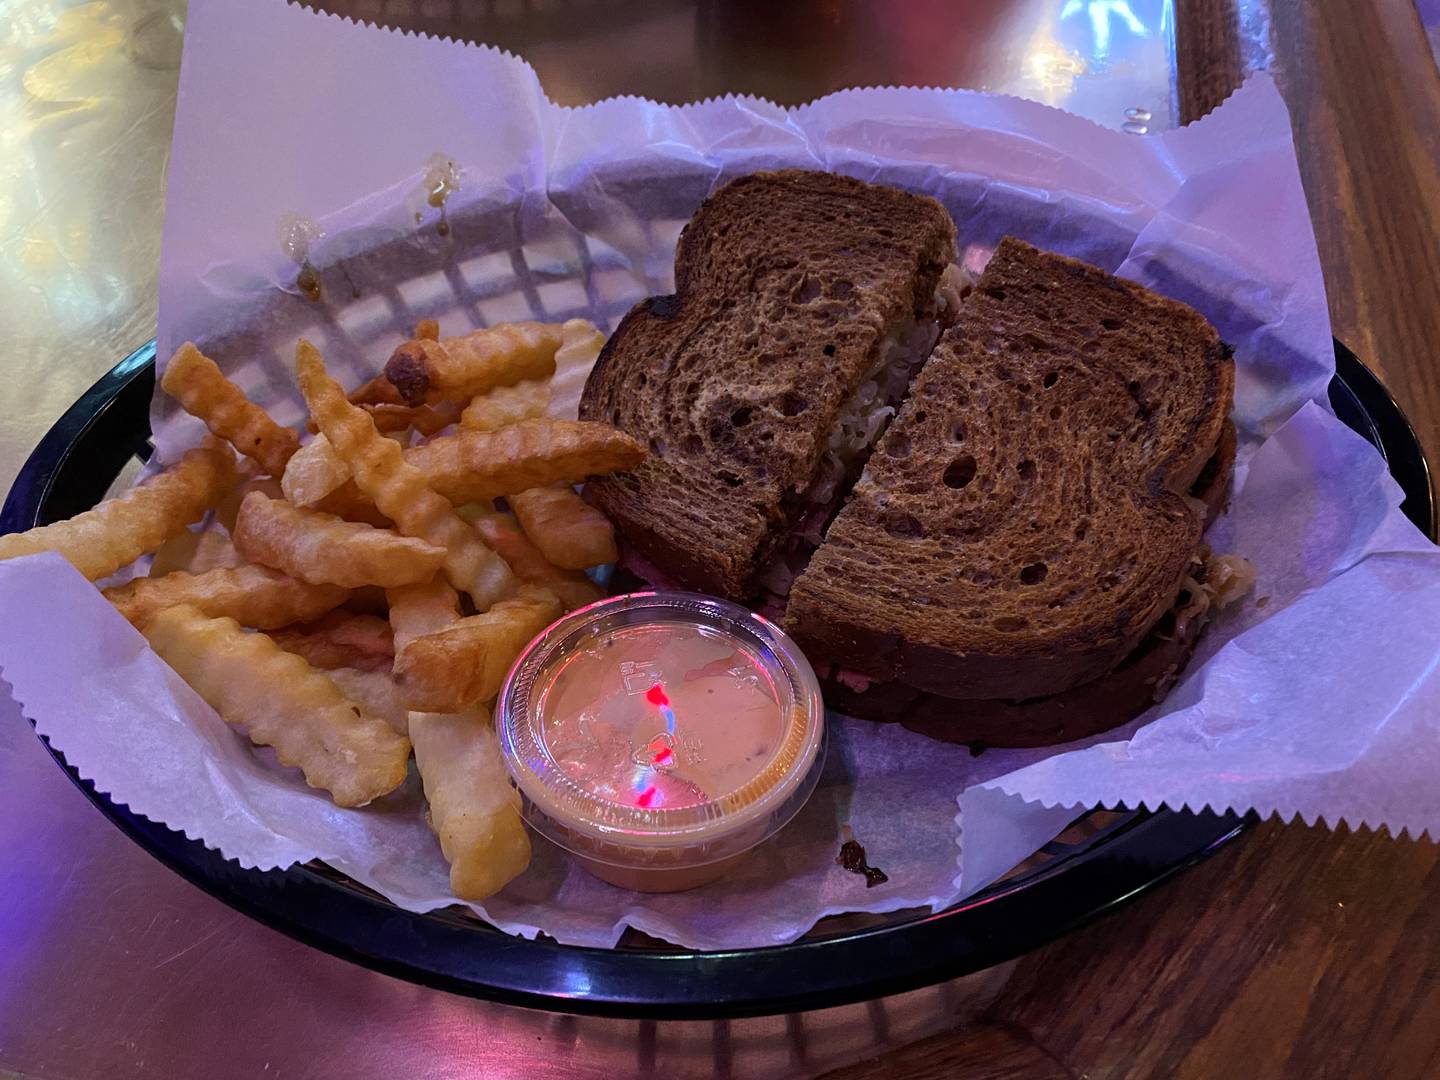 The Reuben sandwich at JJ's Pub in Ottawa stood out for its delicious sauerkraut.